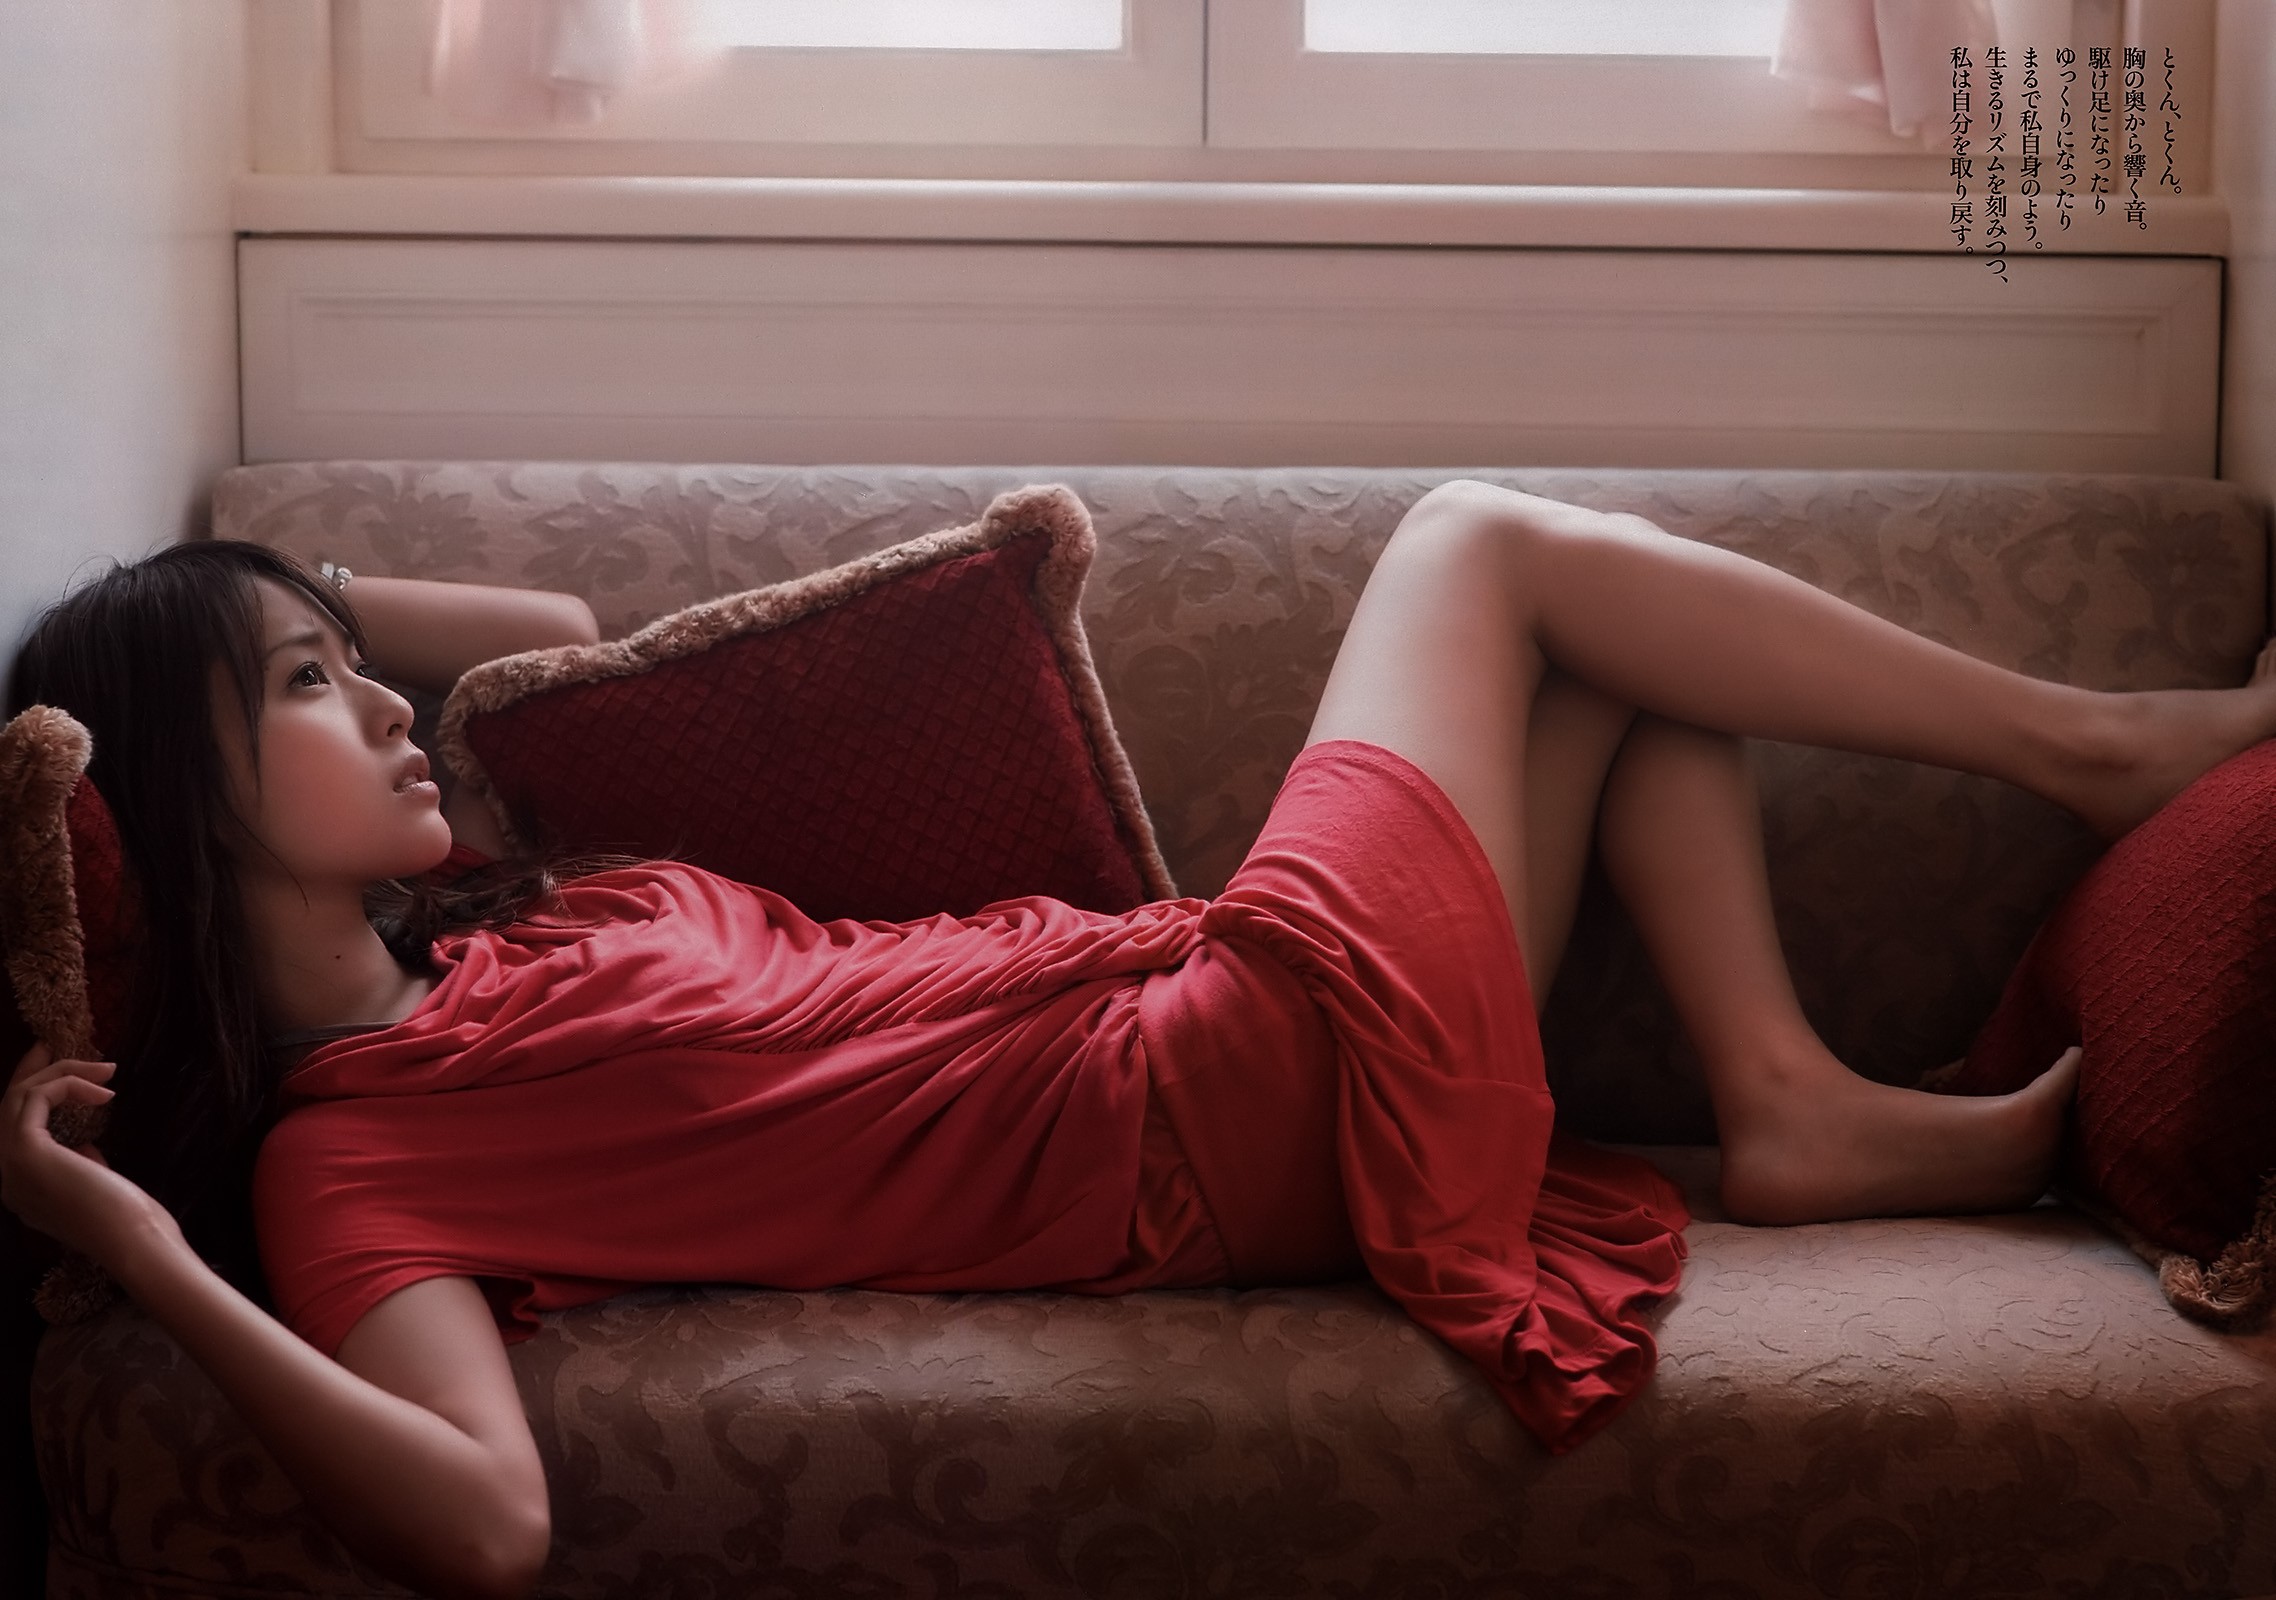 Resolution 1680x1050px, wallpaper girl, red dress, cushions, Asian, couch (...